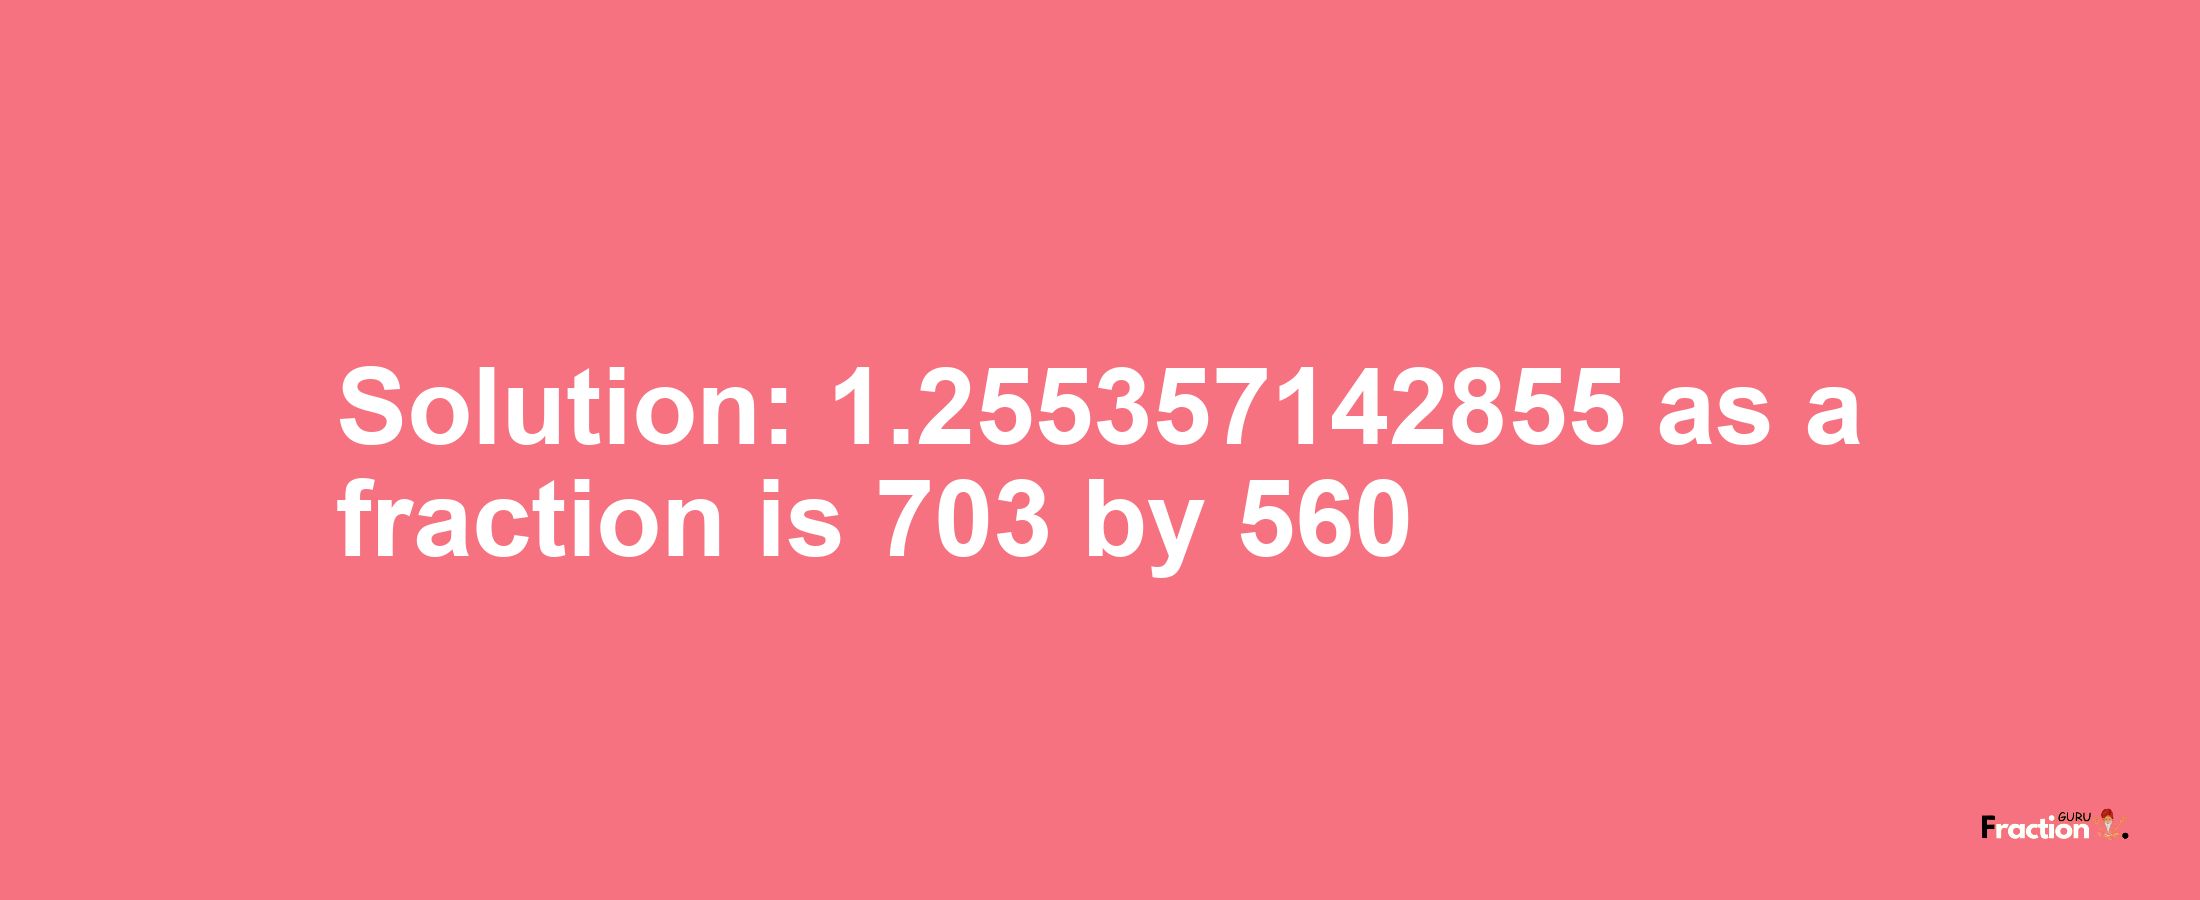 Solution:1.255357142855 as a fraction is 703/560